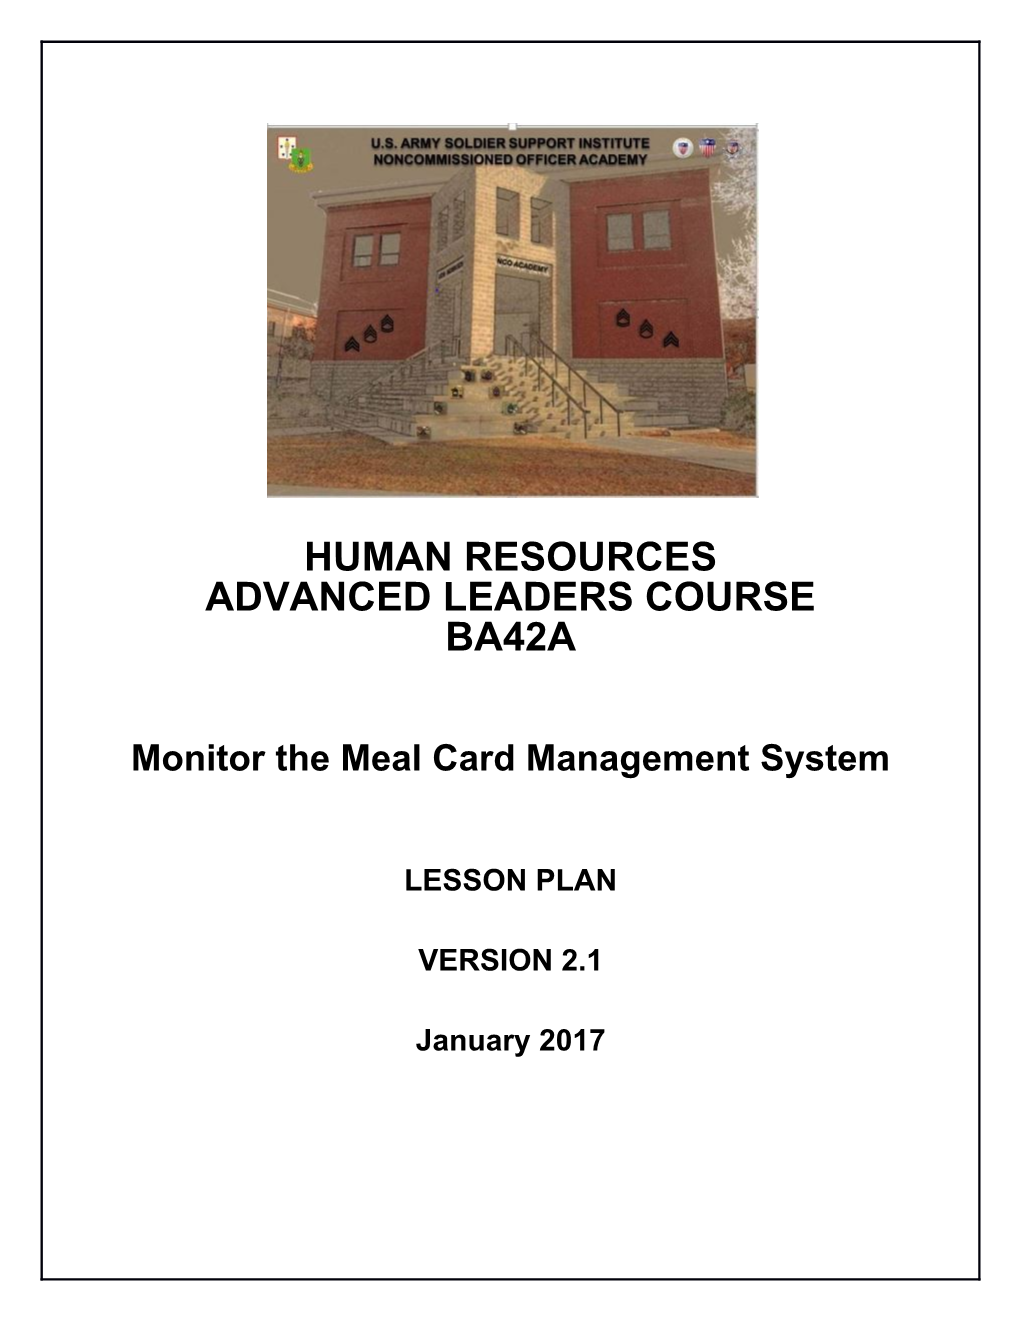 Monitor the Meal Card Management System Lesson Plan